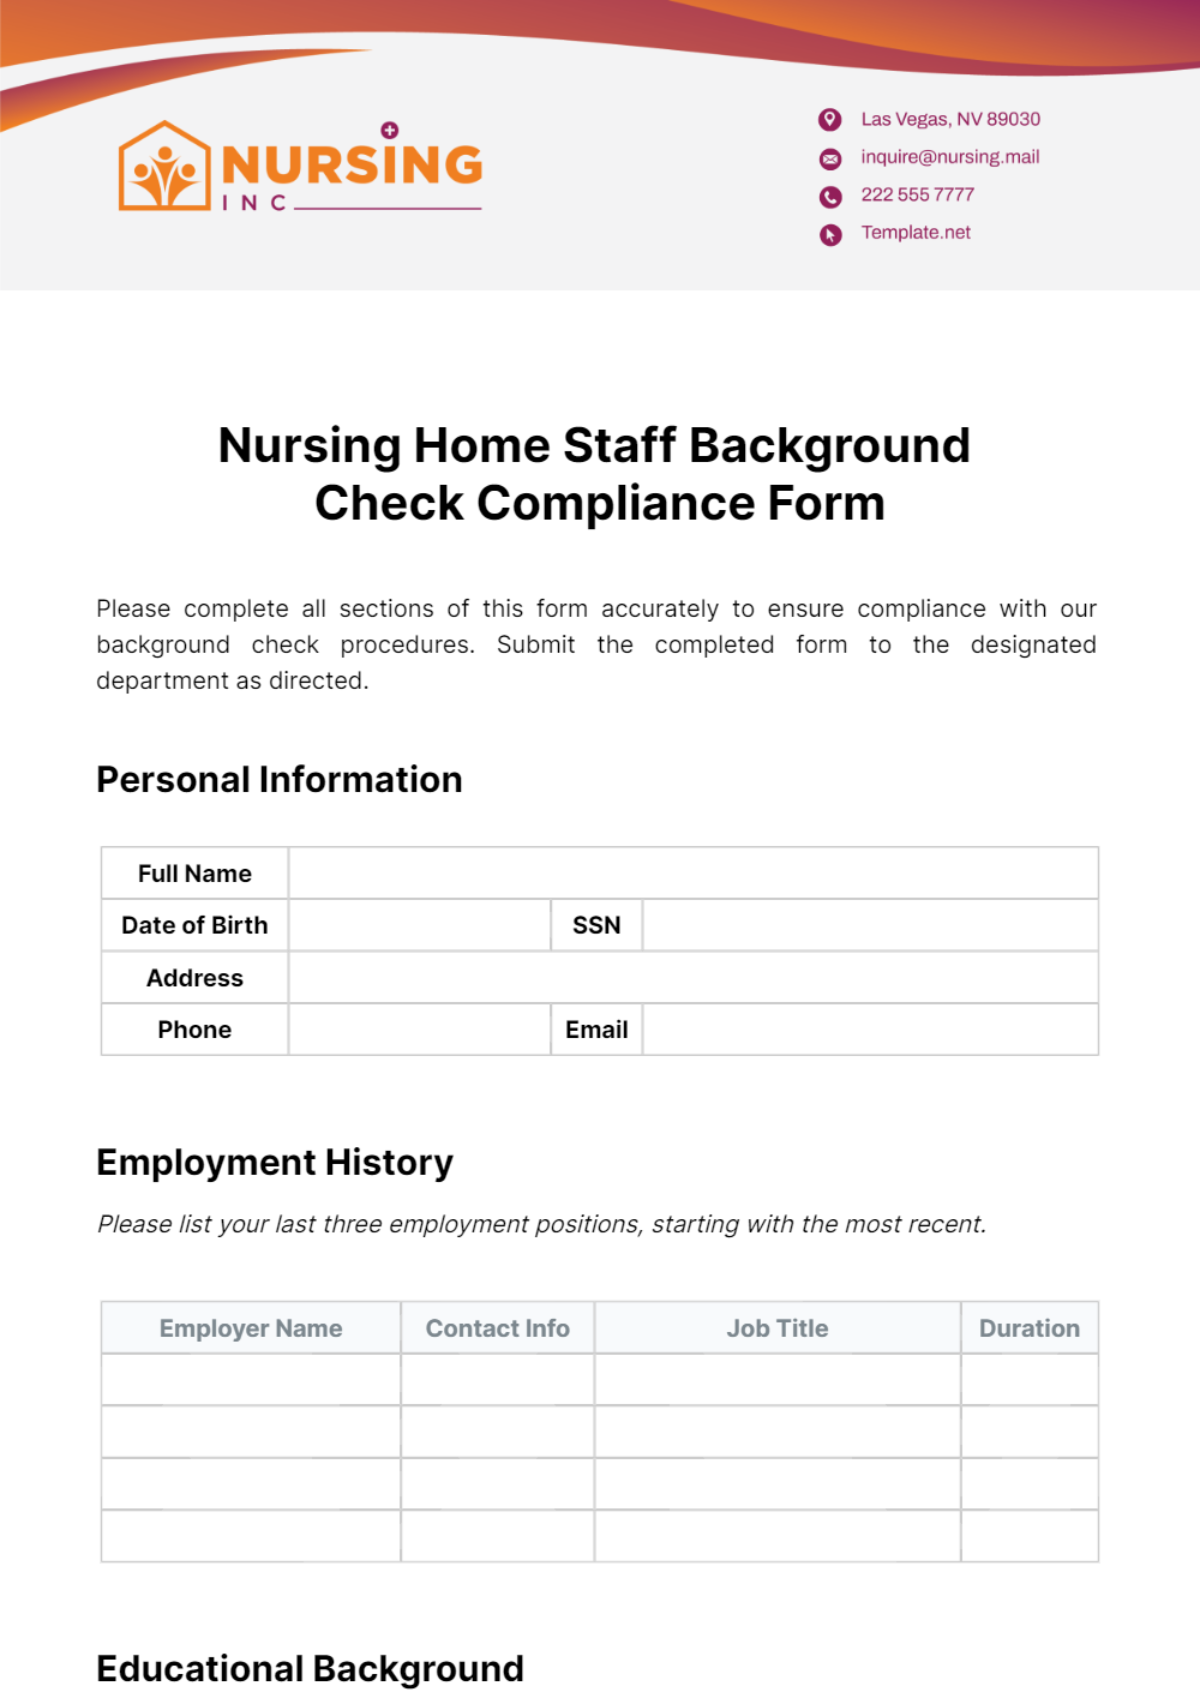 Nursing Home Staff Background Check Compliance Form Template